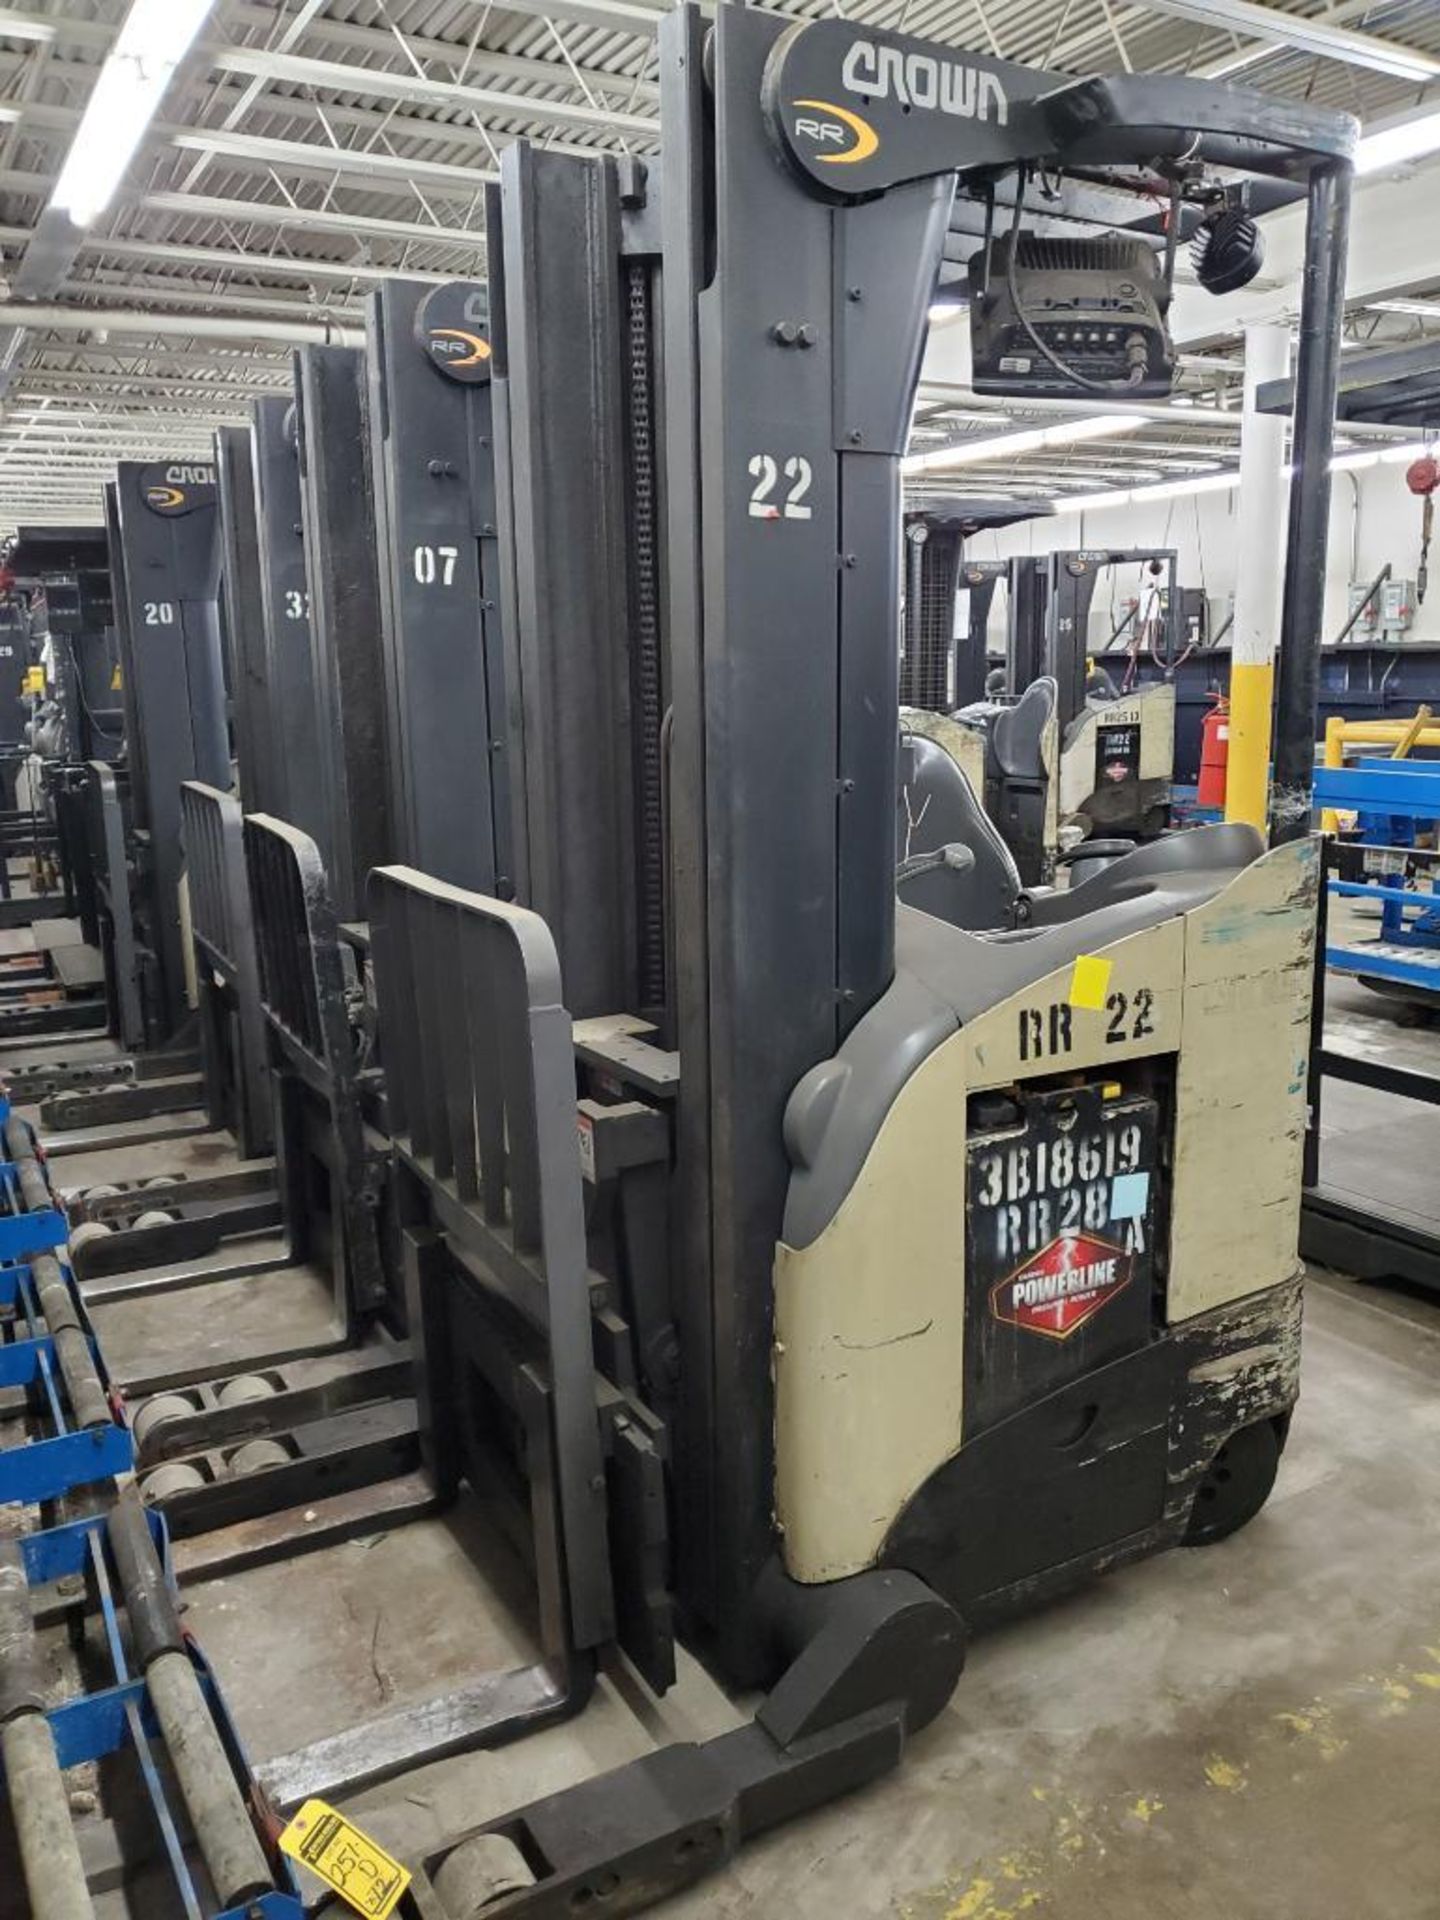 Crown RR 5200 Series Electric Reach Truck, Model RR5220-45, S/N. 1A322087, 4,500 LB. Lift Capacity, - Image 4 of 10